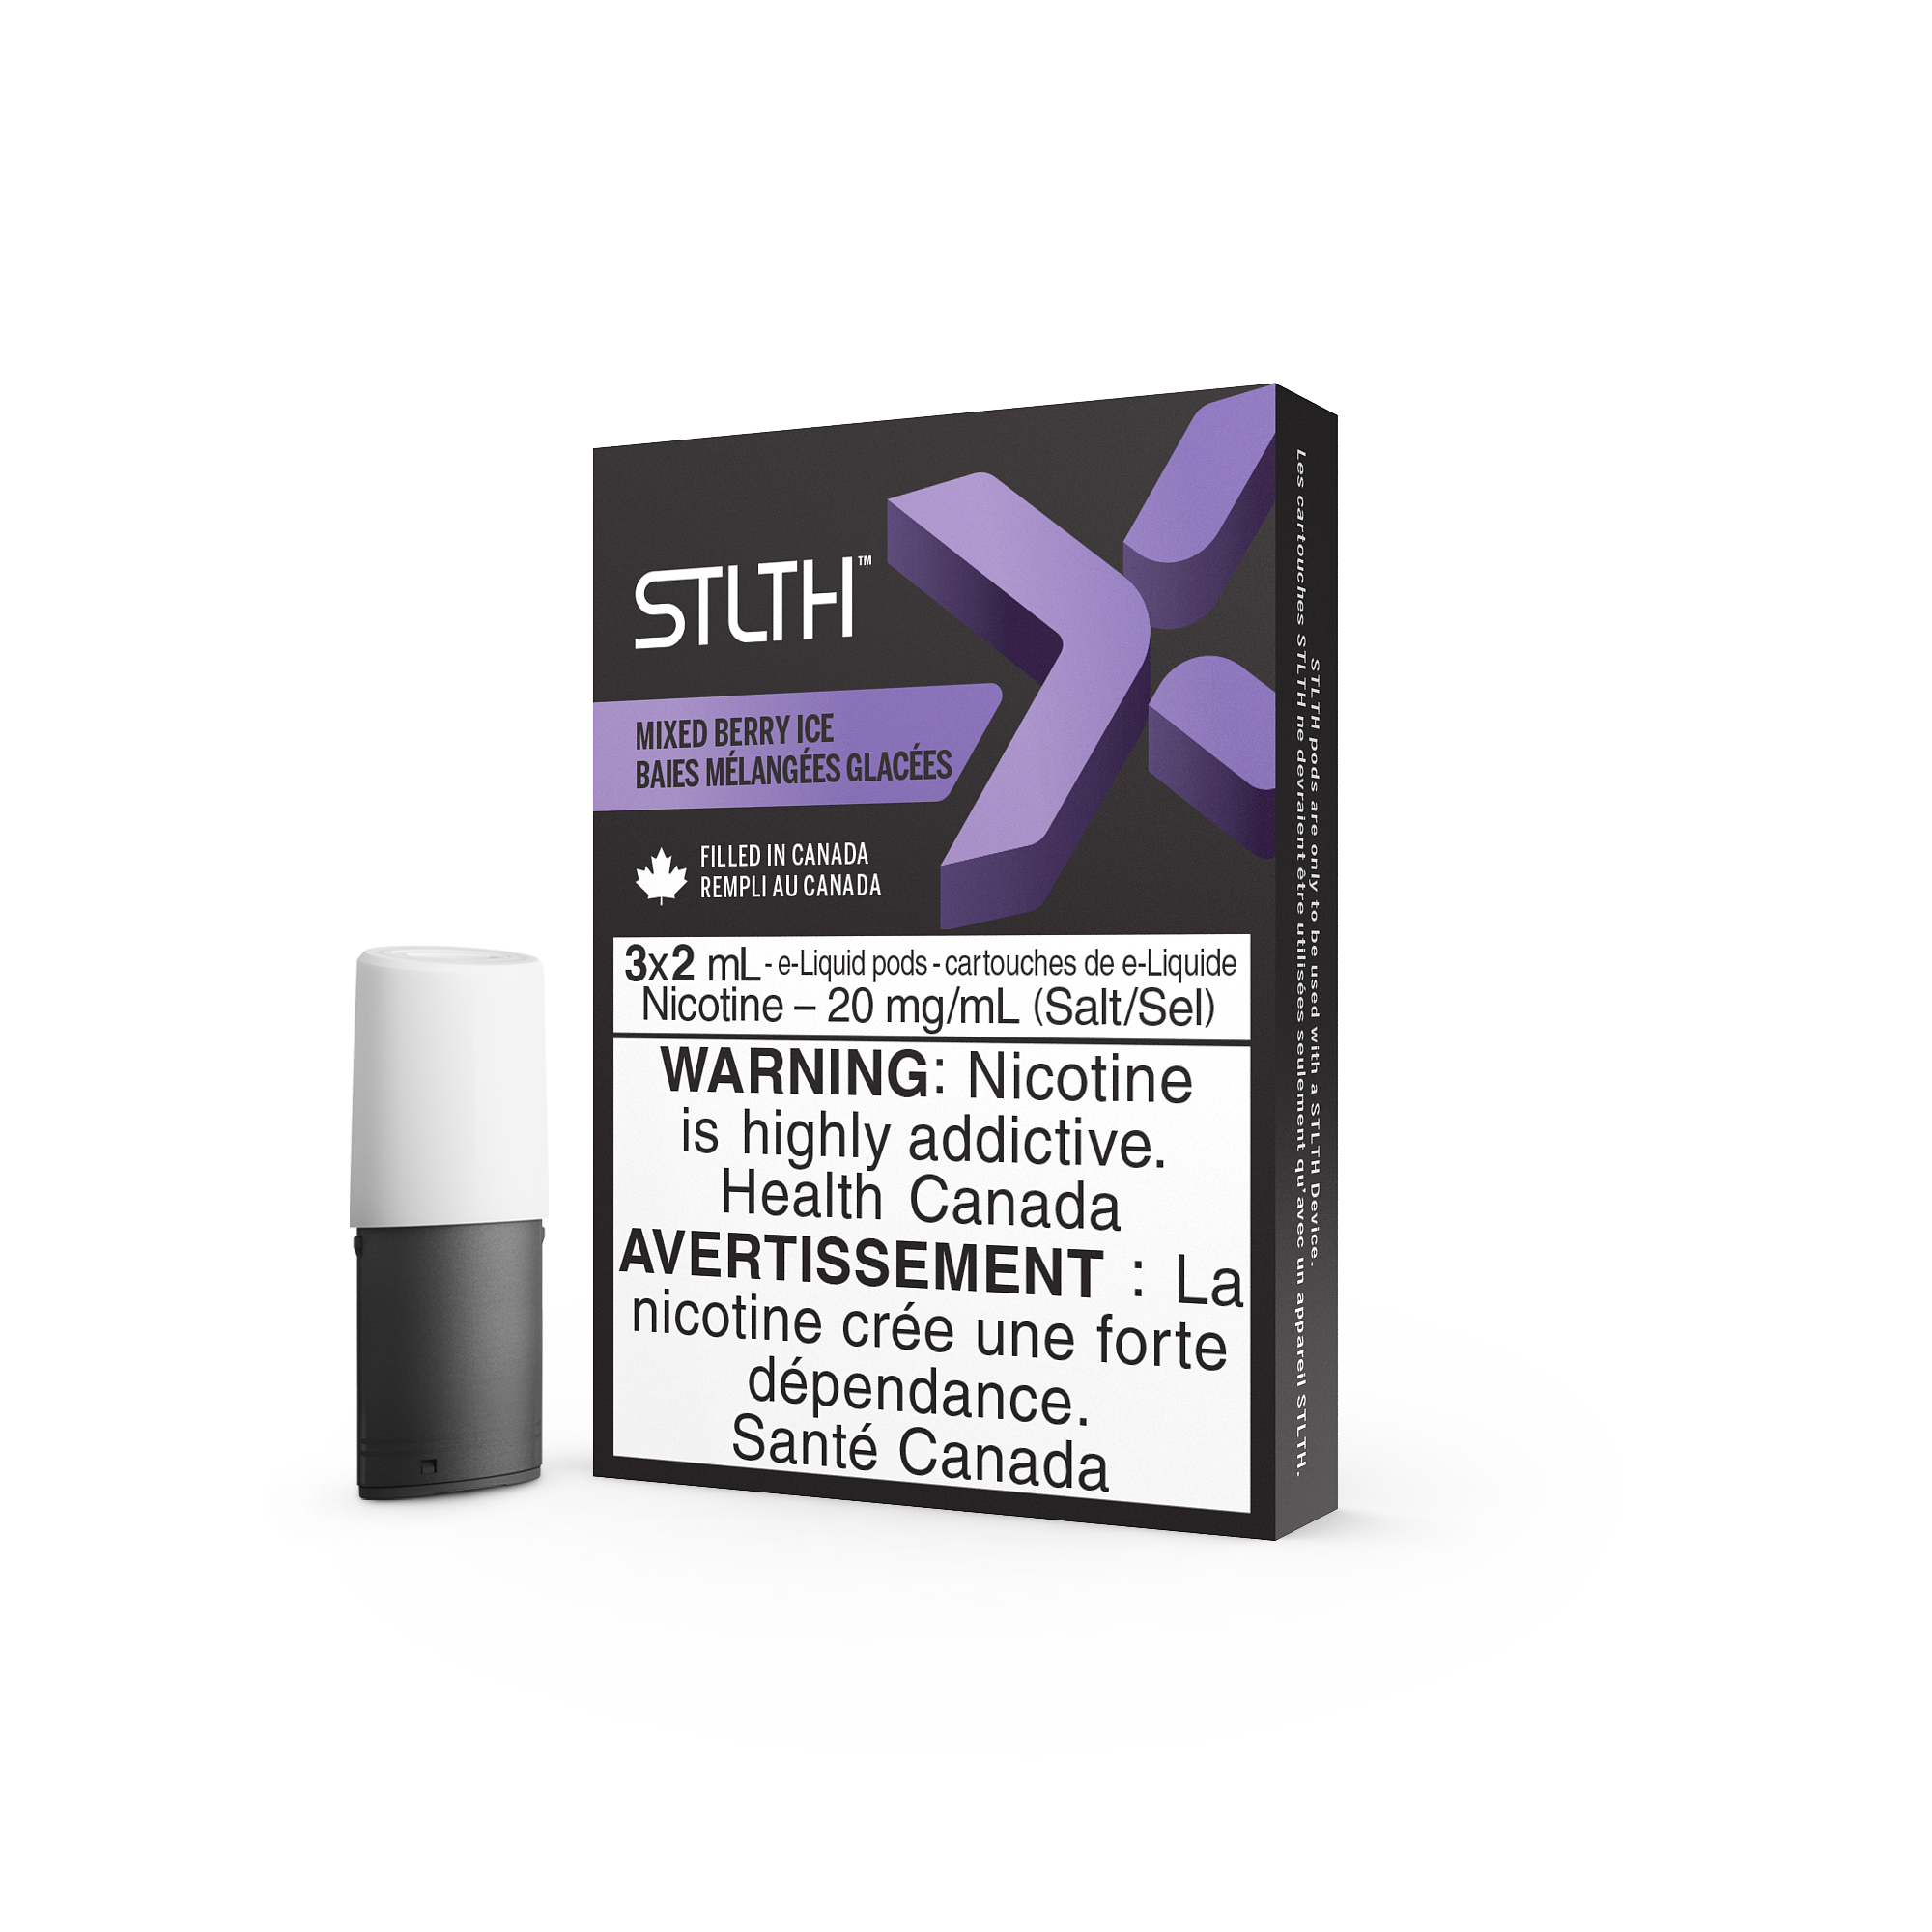 STLTH X POD PACK MIXED BERRY ICE